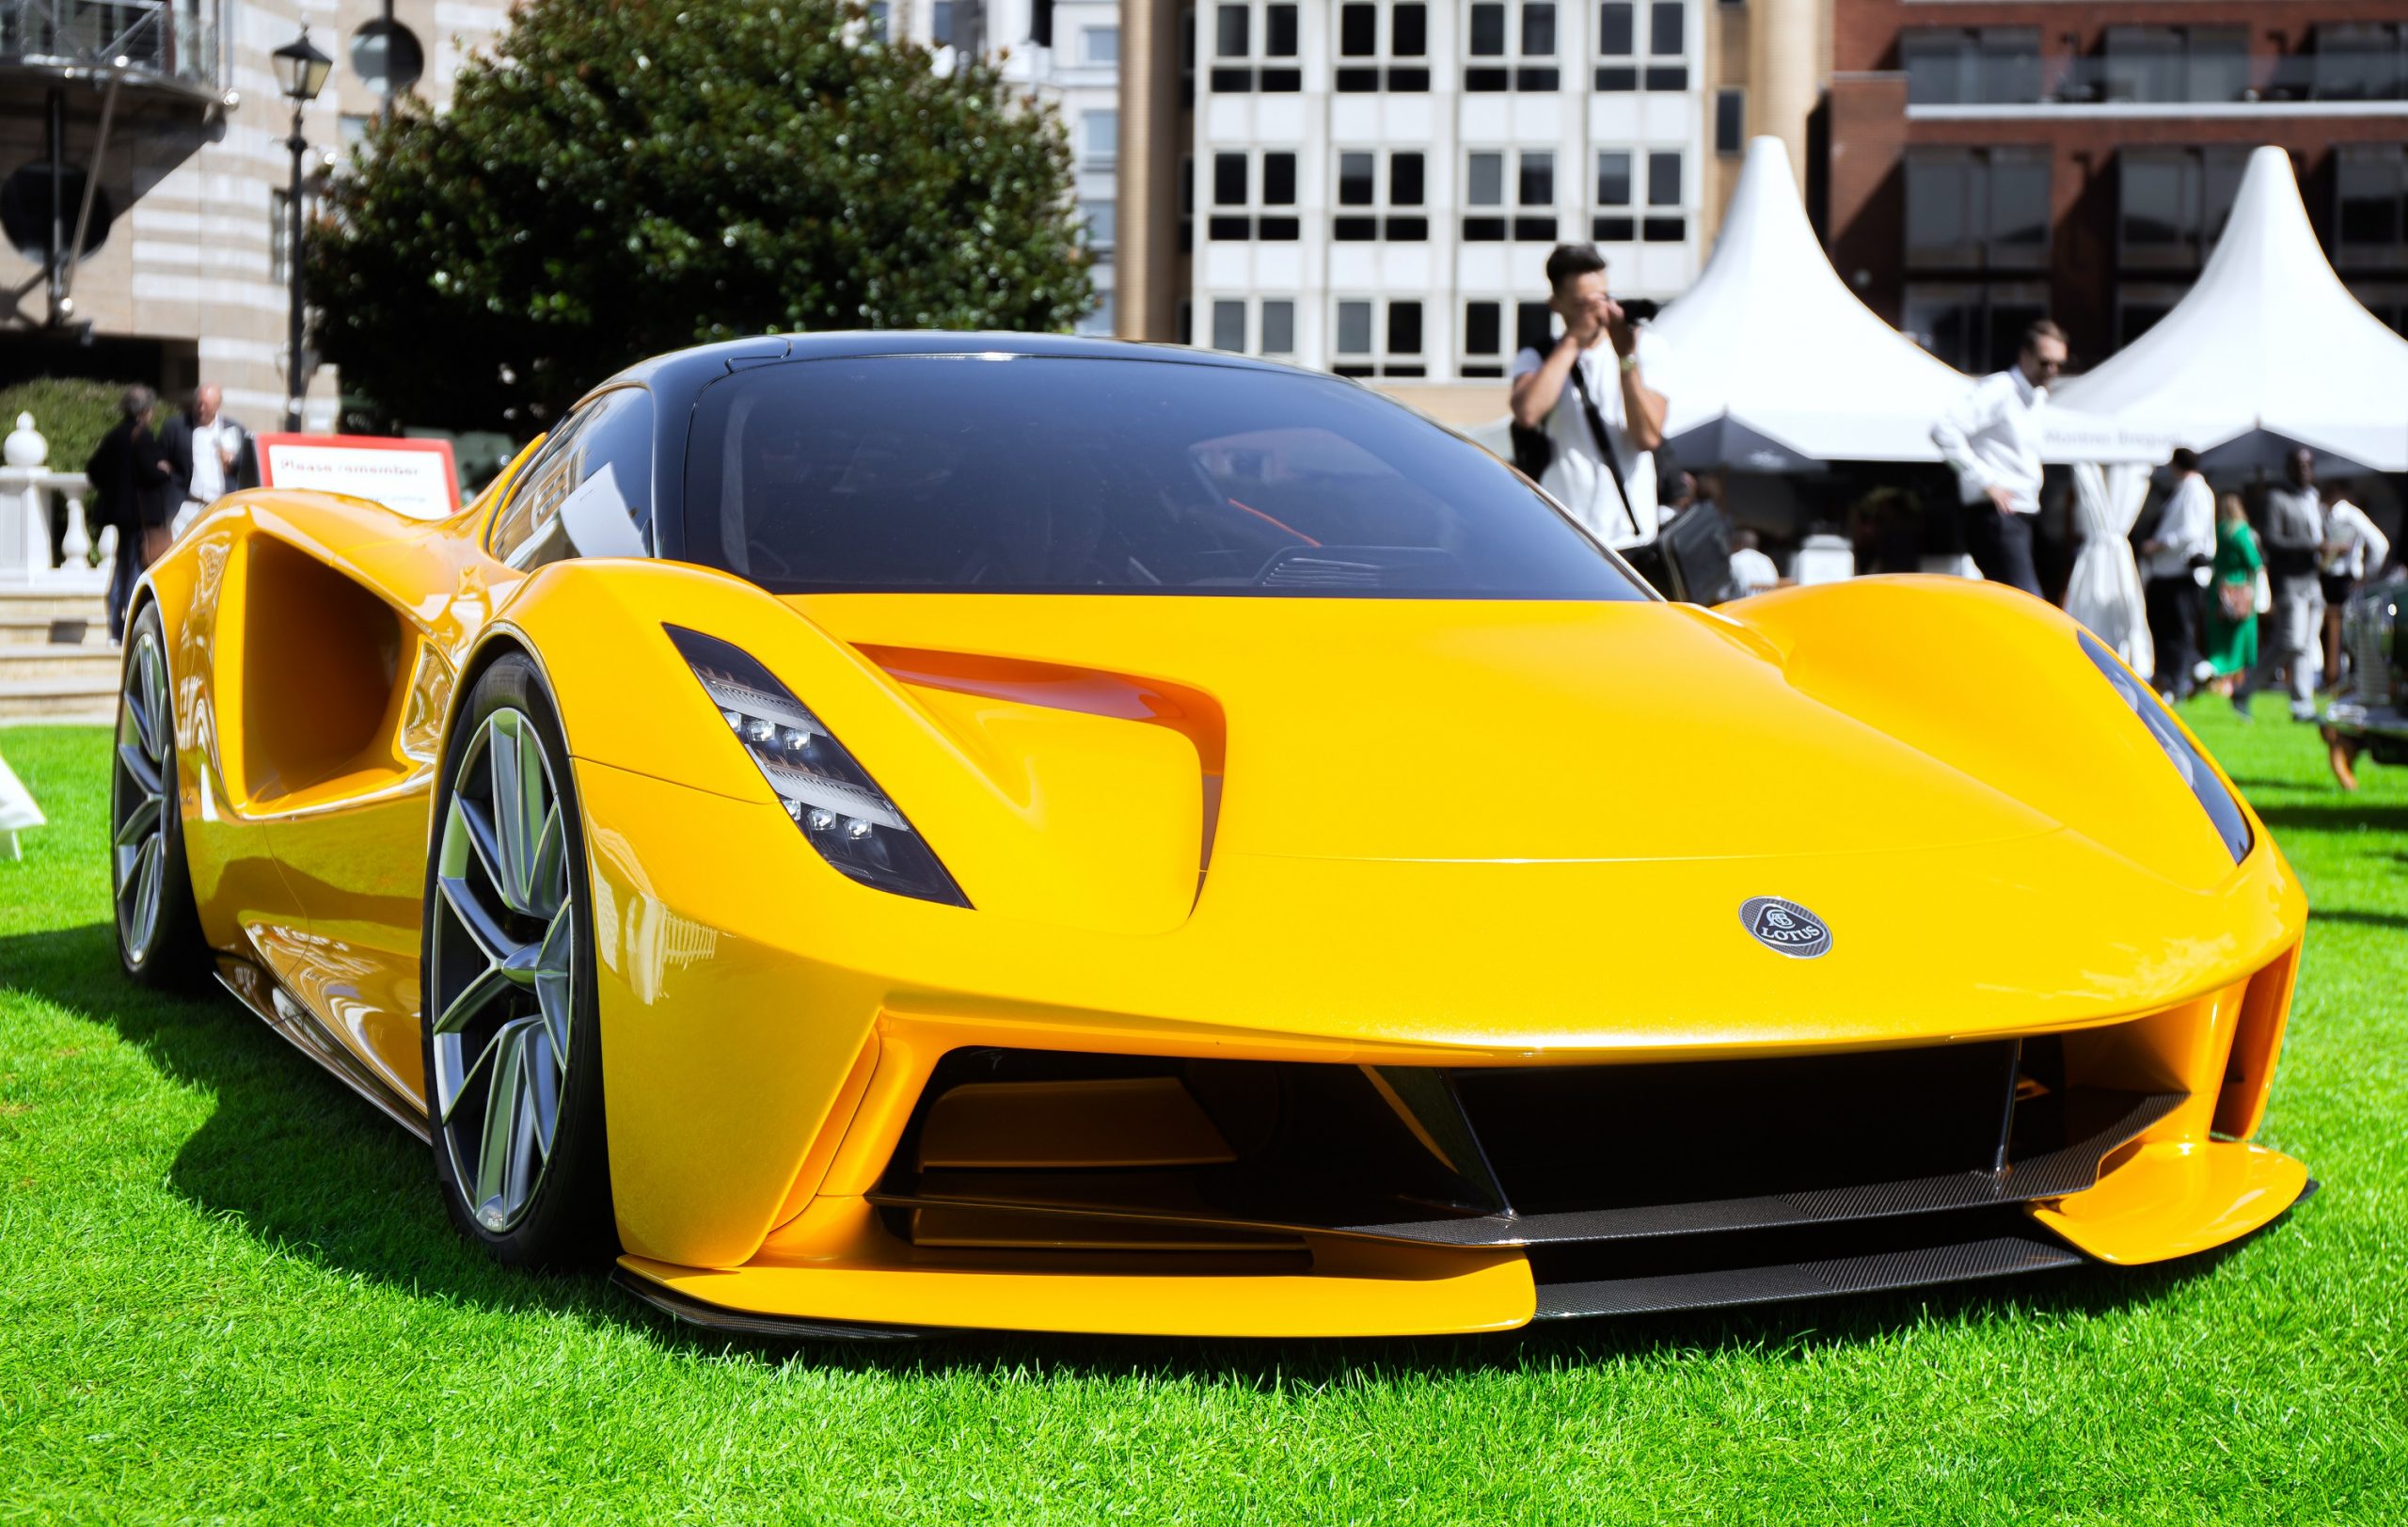 A yellow Lotus Evija, the brand's electric hypercar, shot from the front 3/4 on a concourse lawn